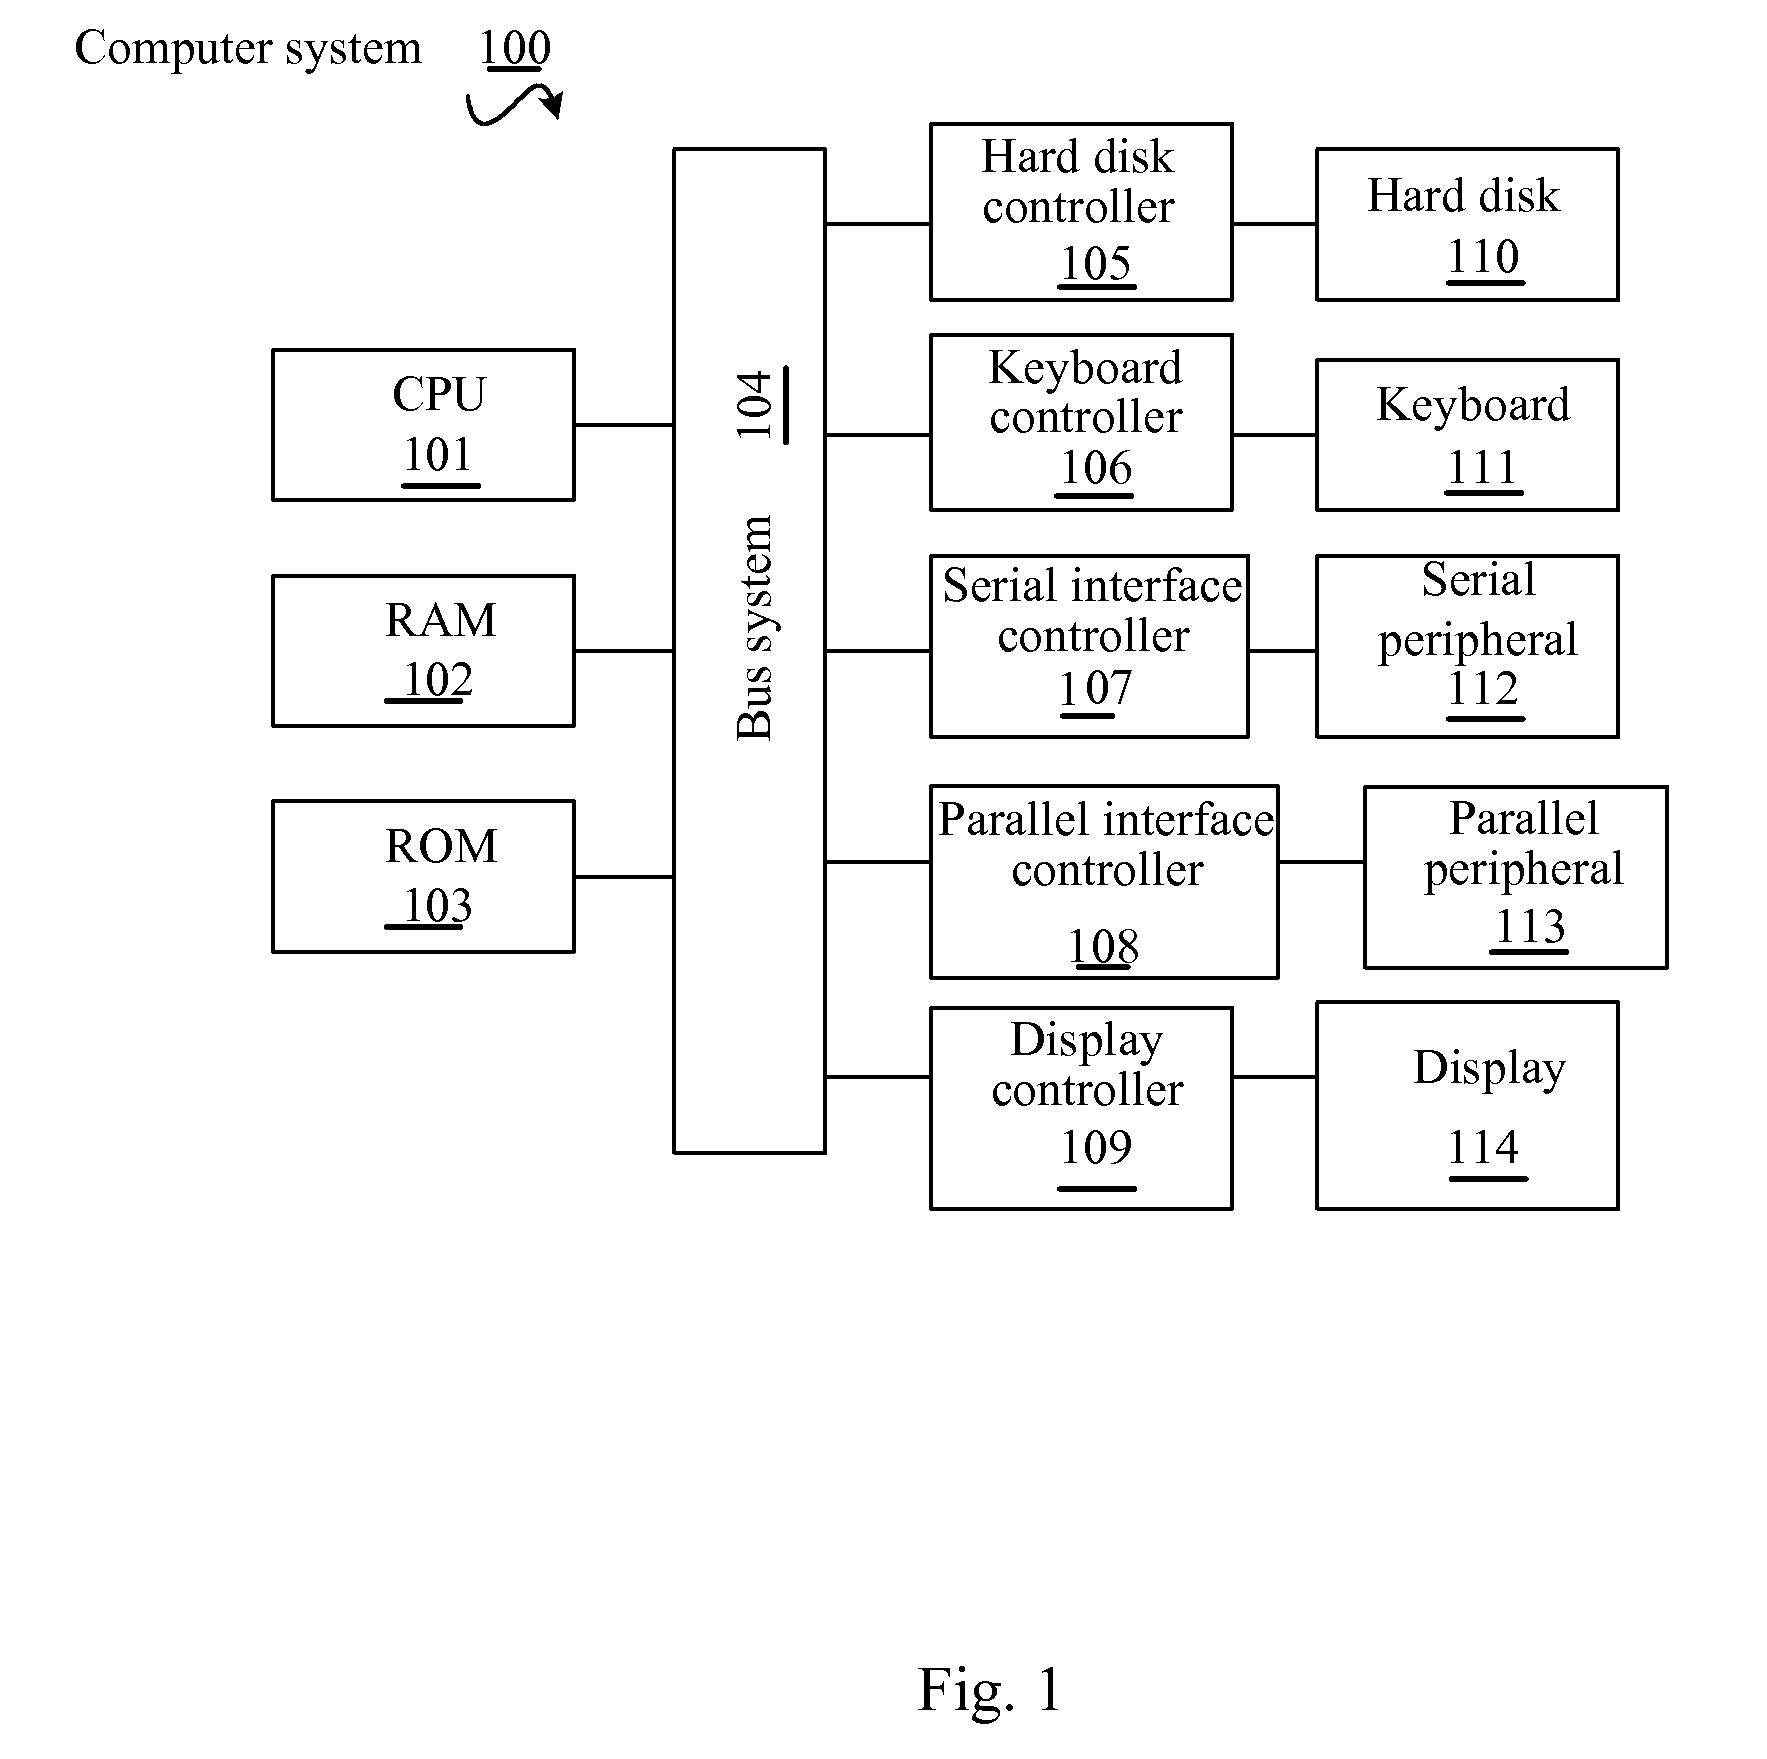 Method and System for Preventing Phishing Attacks